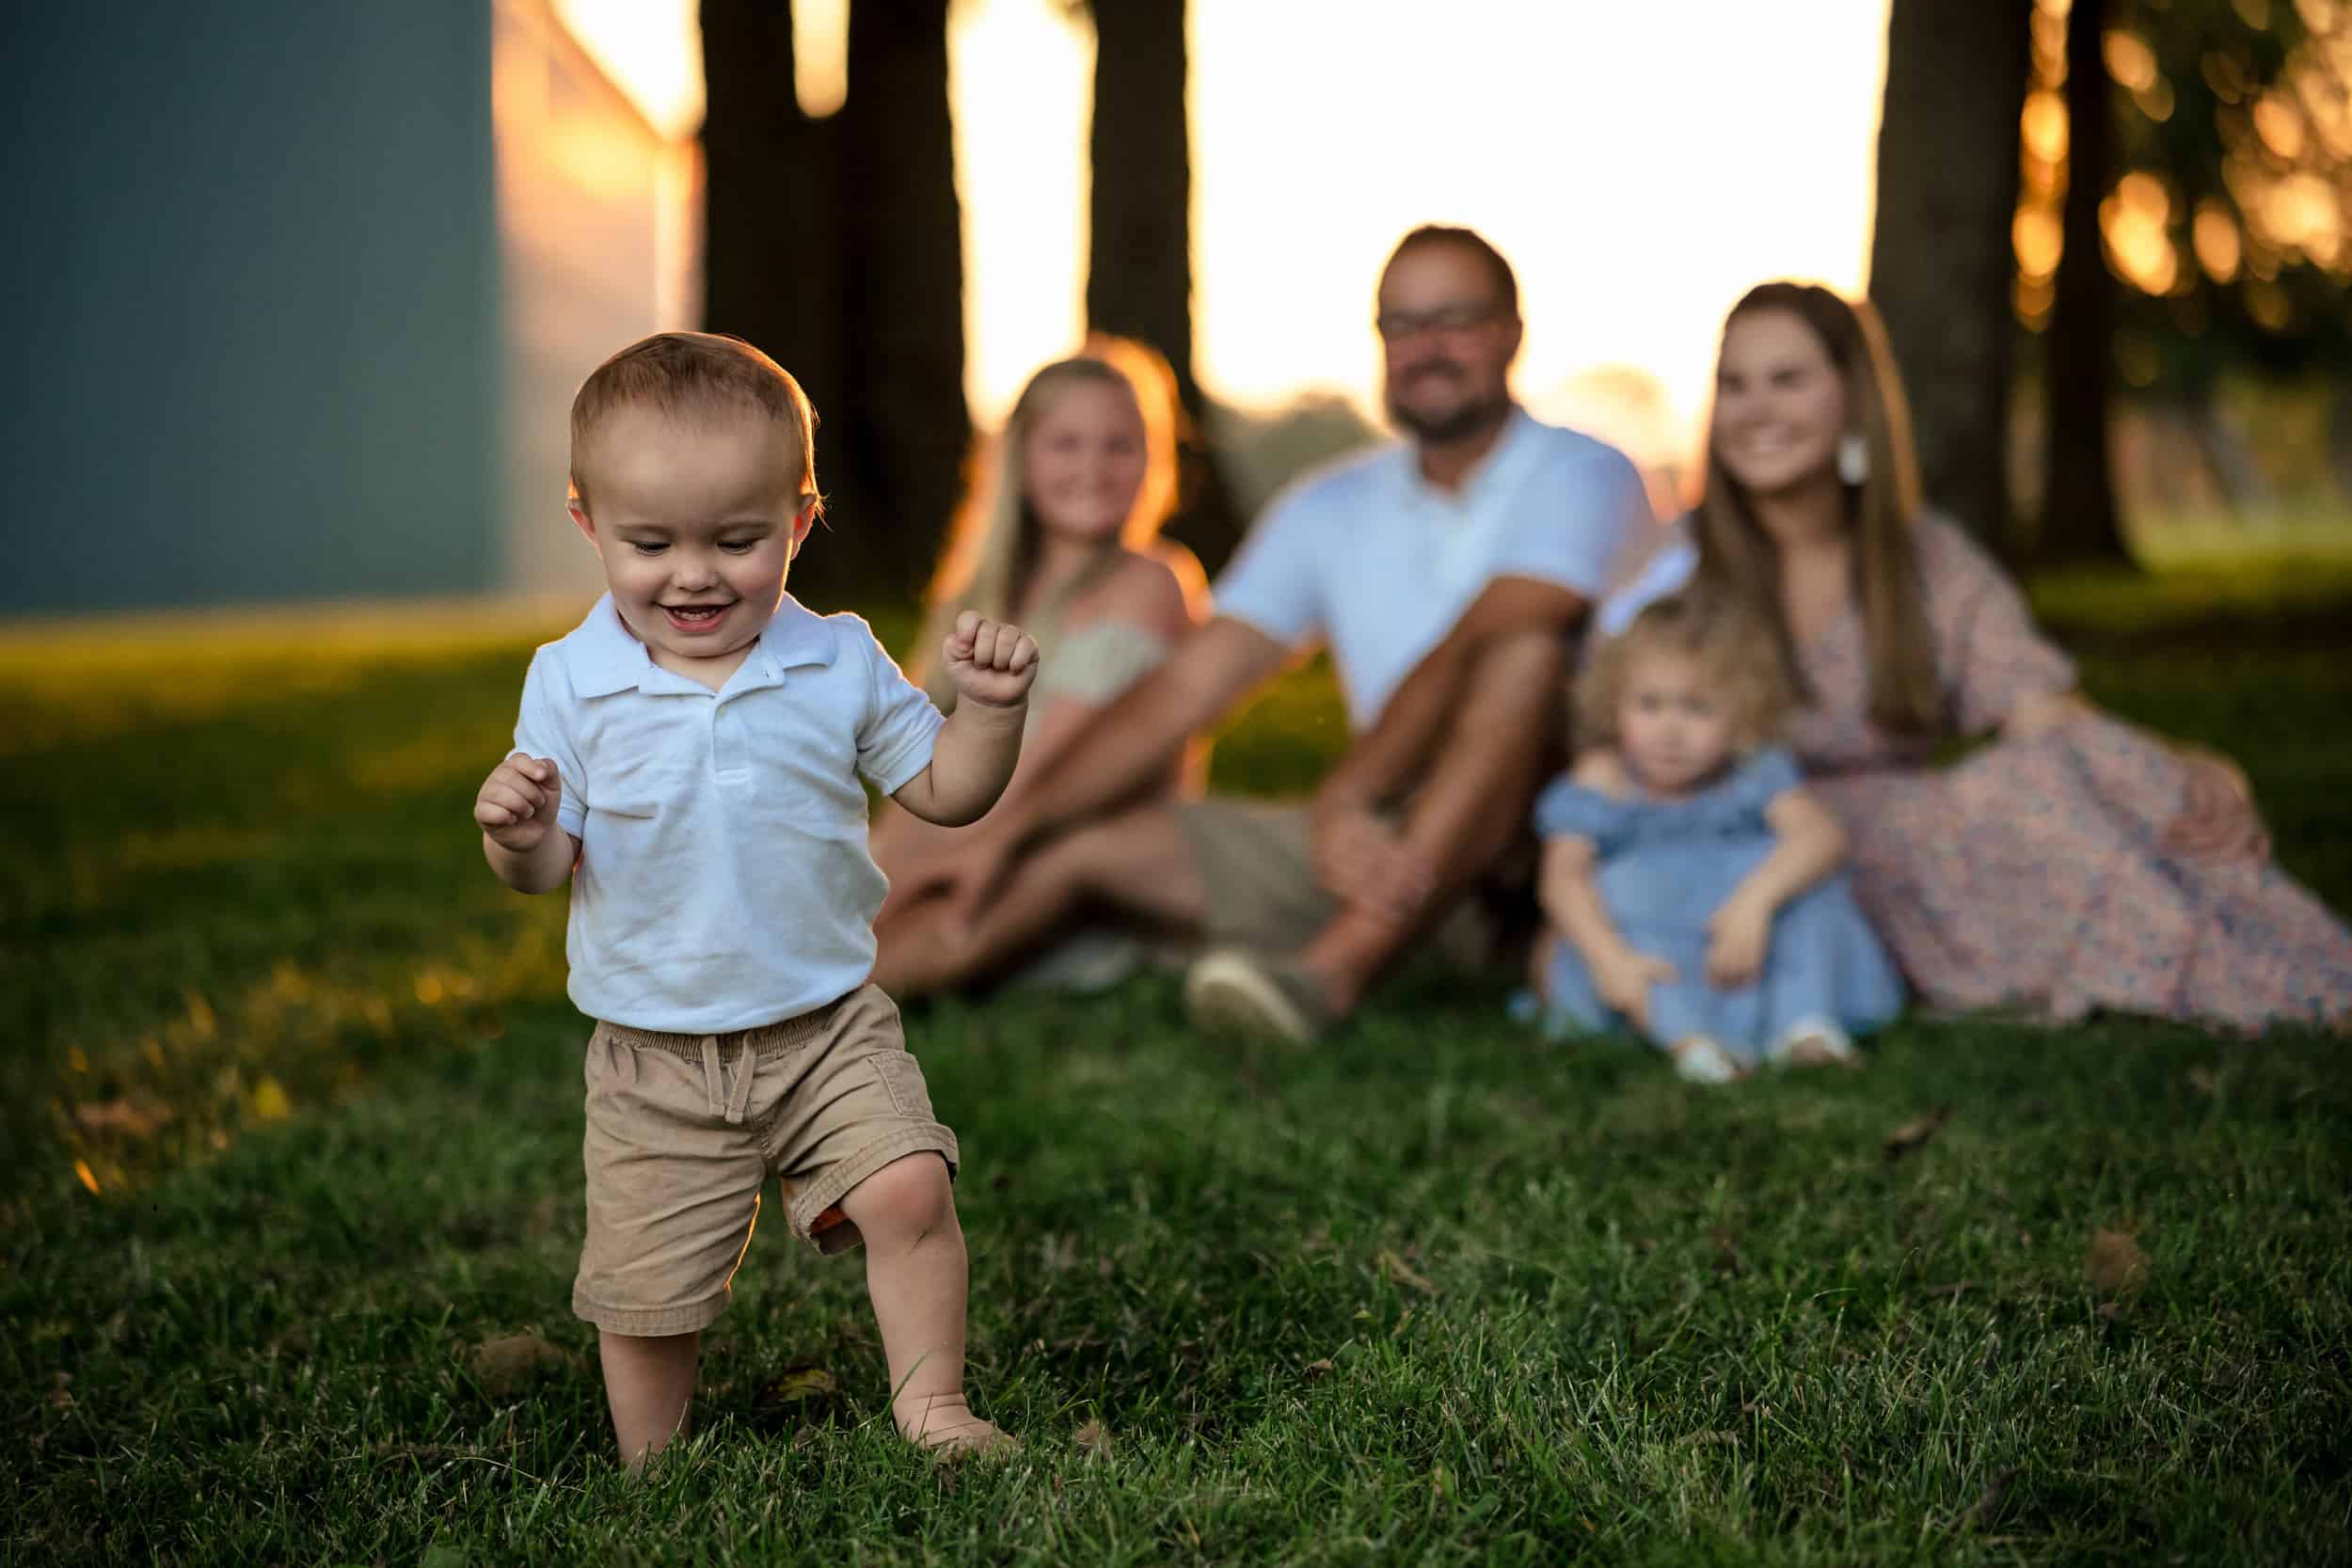 A family sits on a grassy field at sunset.